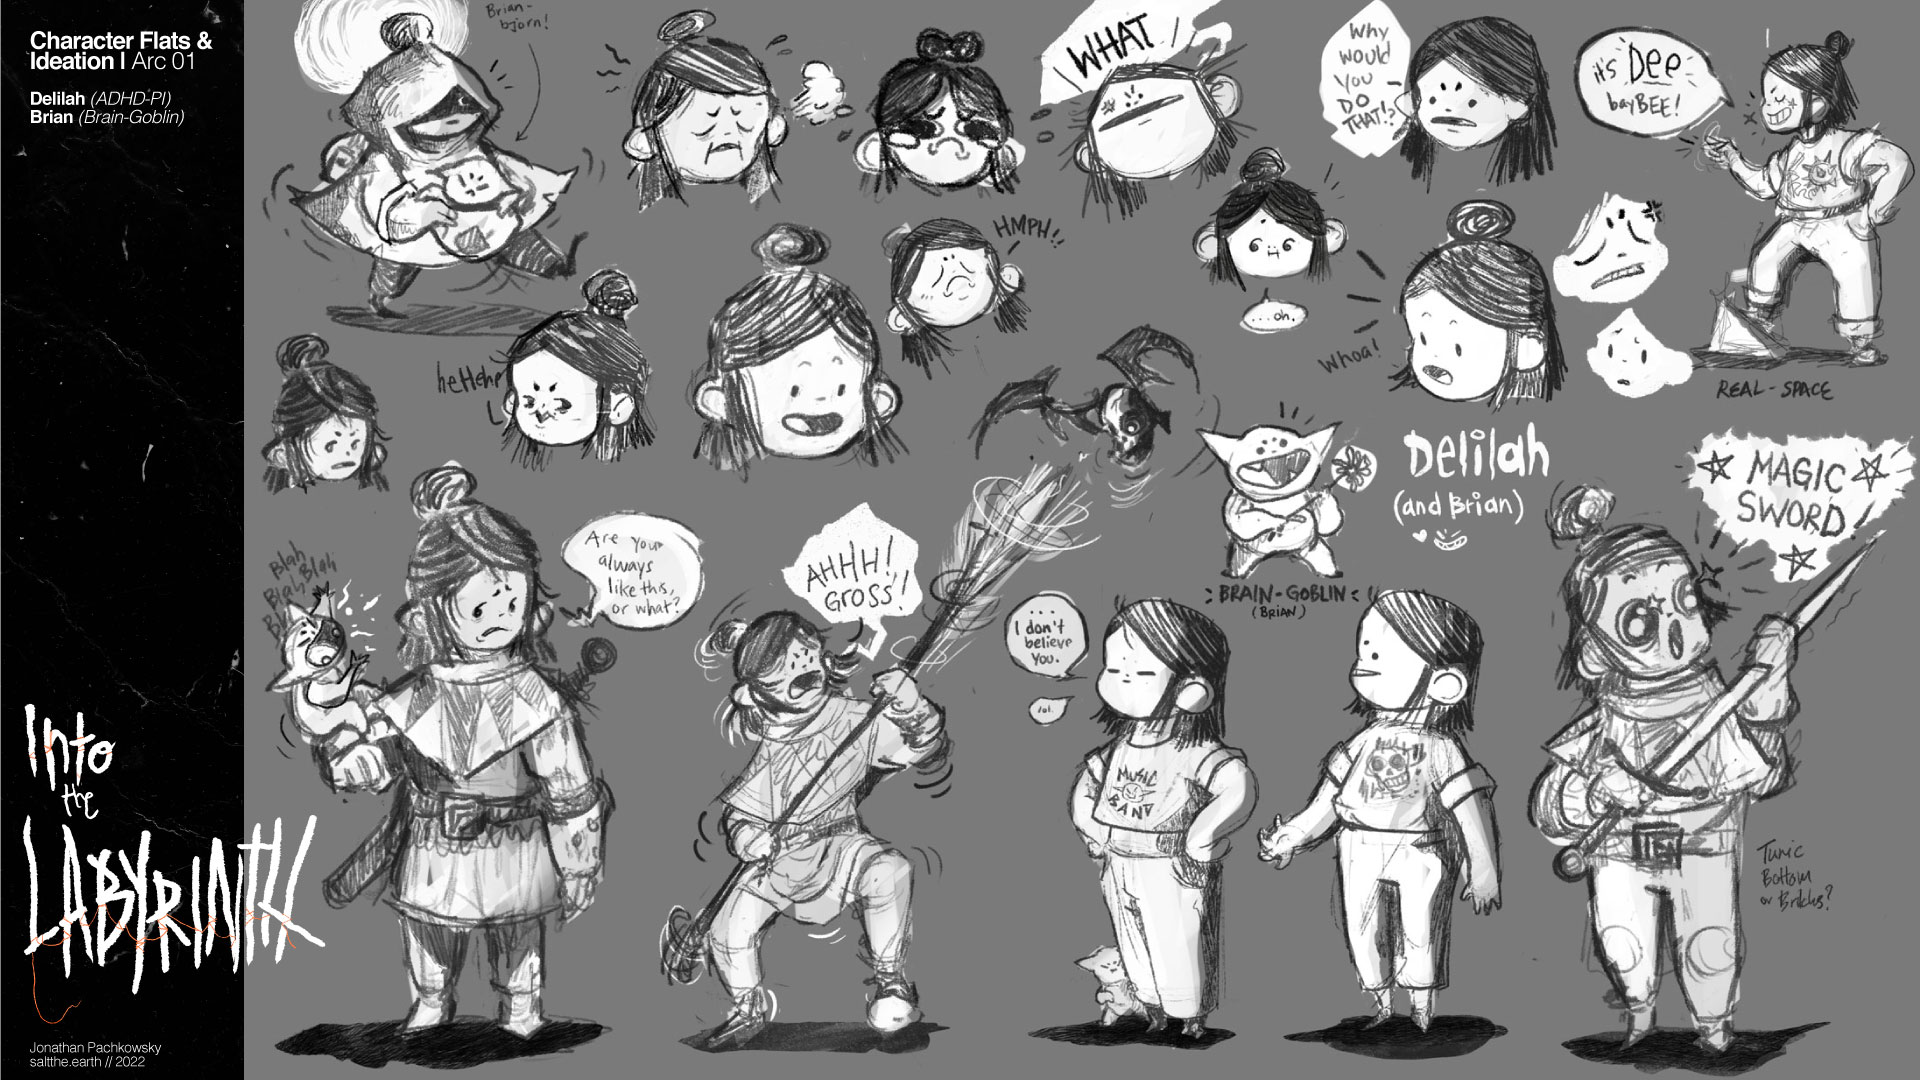 A character sheet with various poses and expression samples for the protagonist Delilah and her brain-goblin companion, Brian.